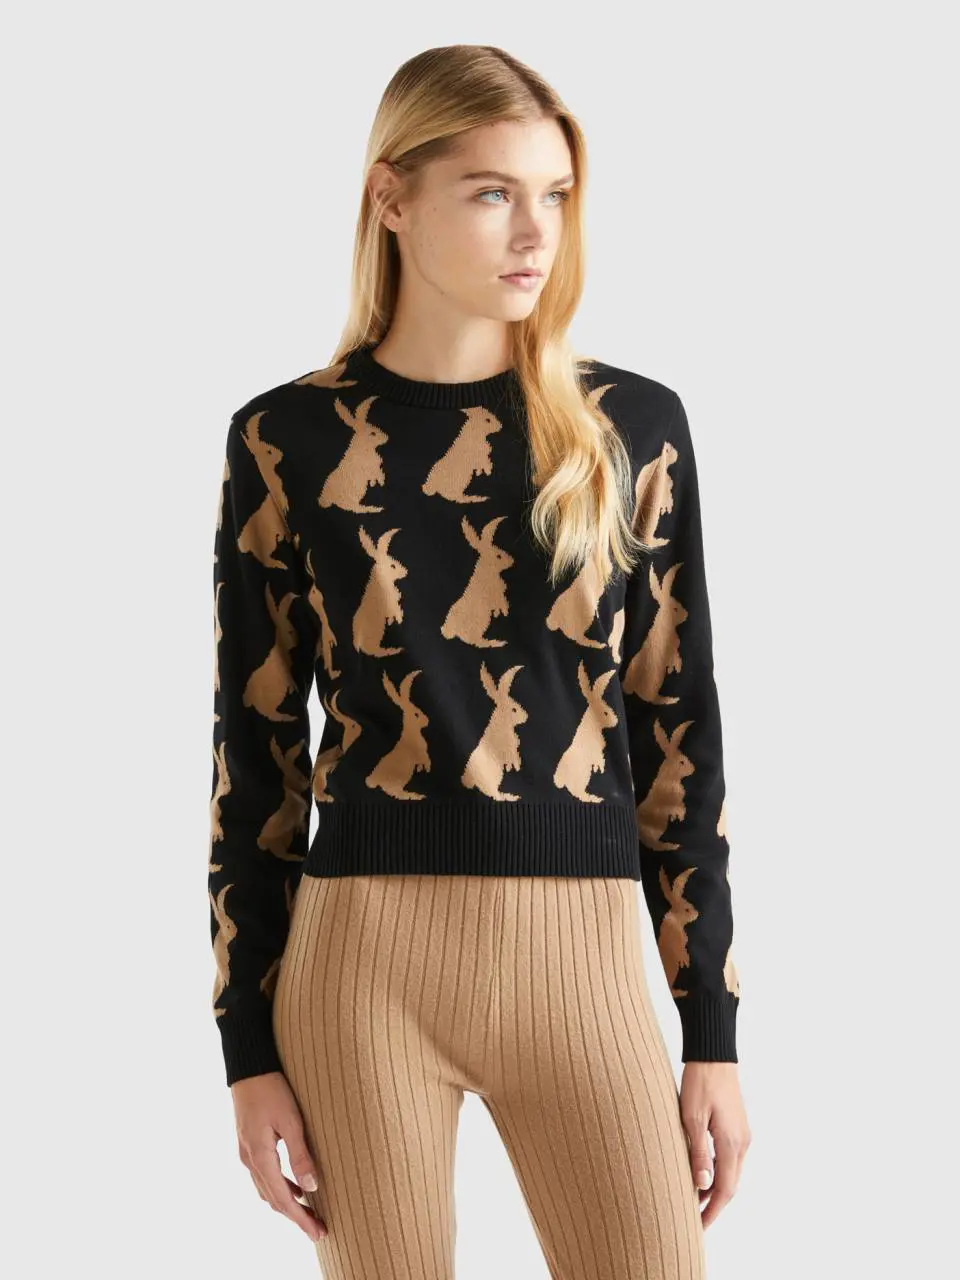 Benetton sweater with bunny pattern. 1